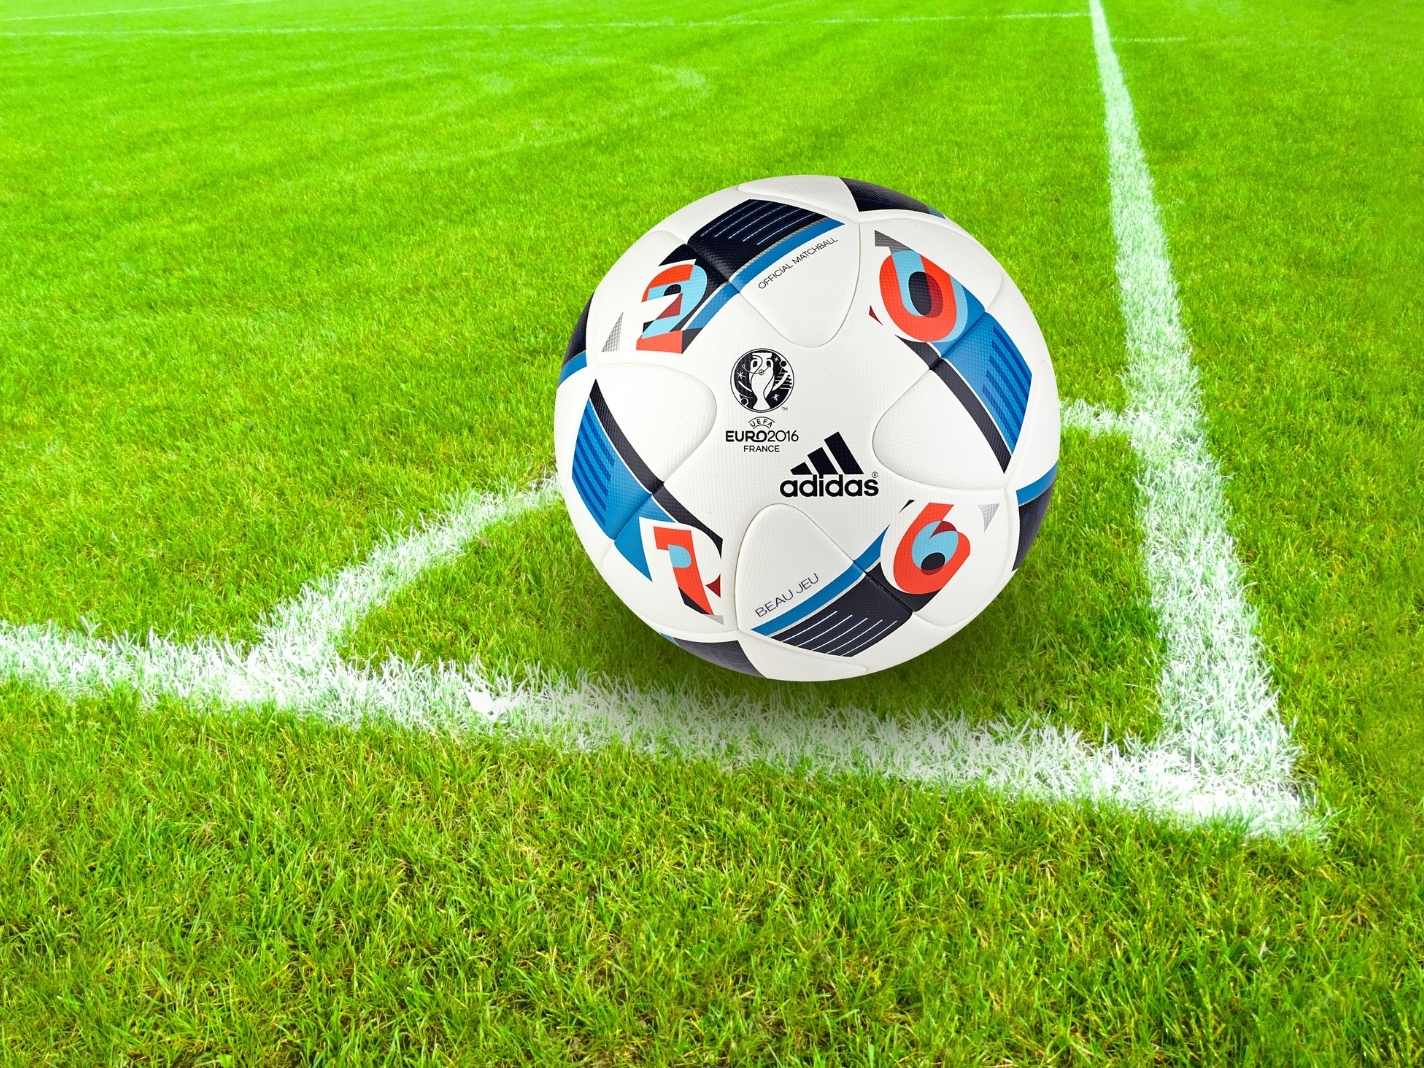 Long-time sponsors Adidas drop football partnership with Russia